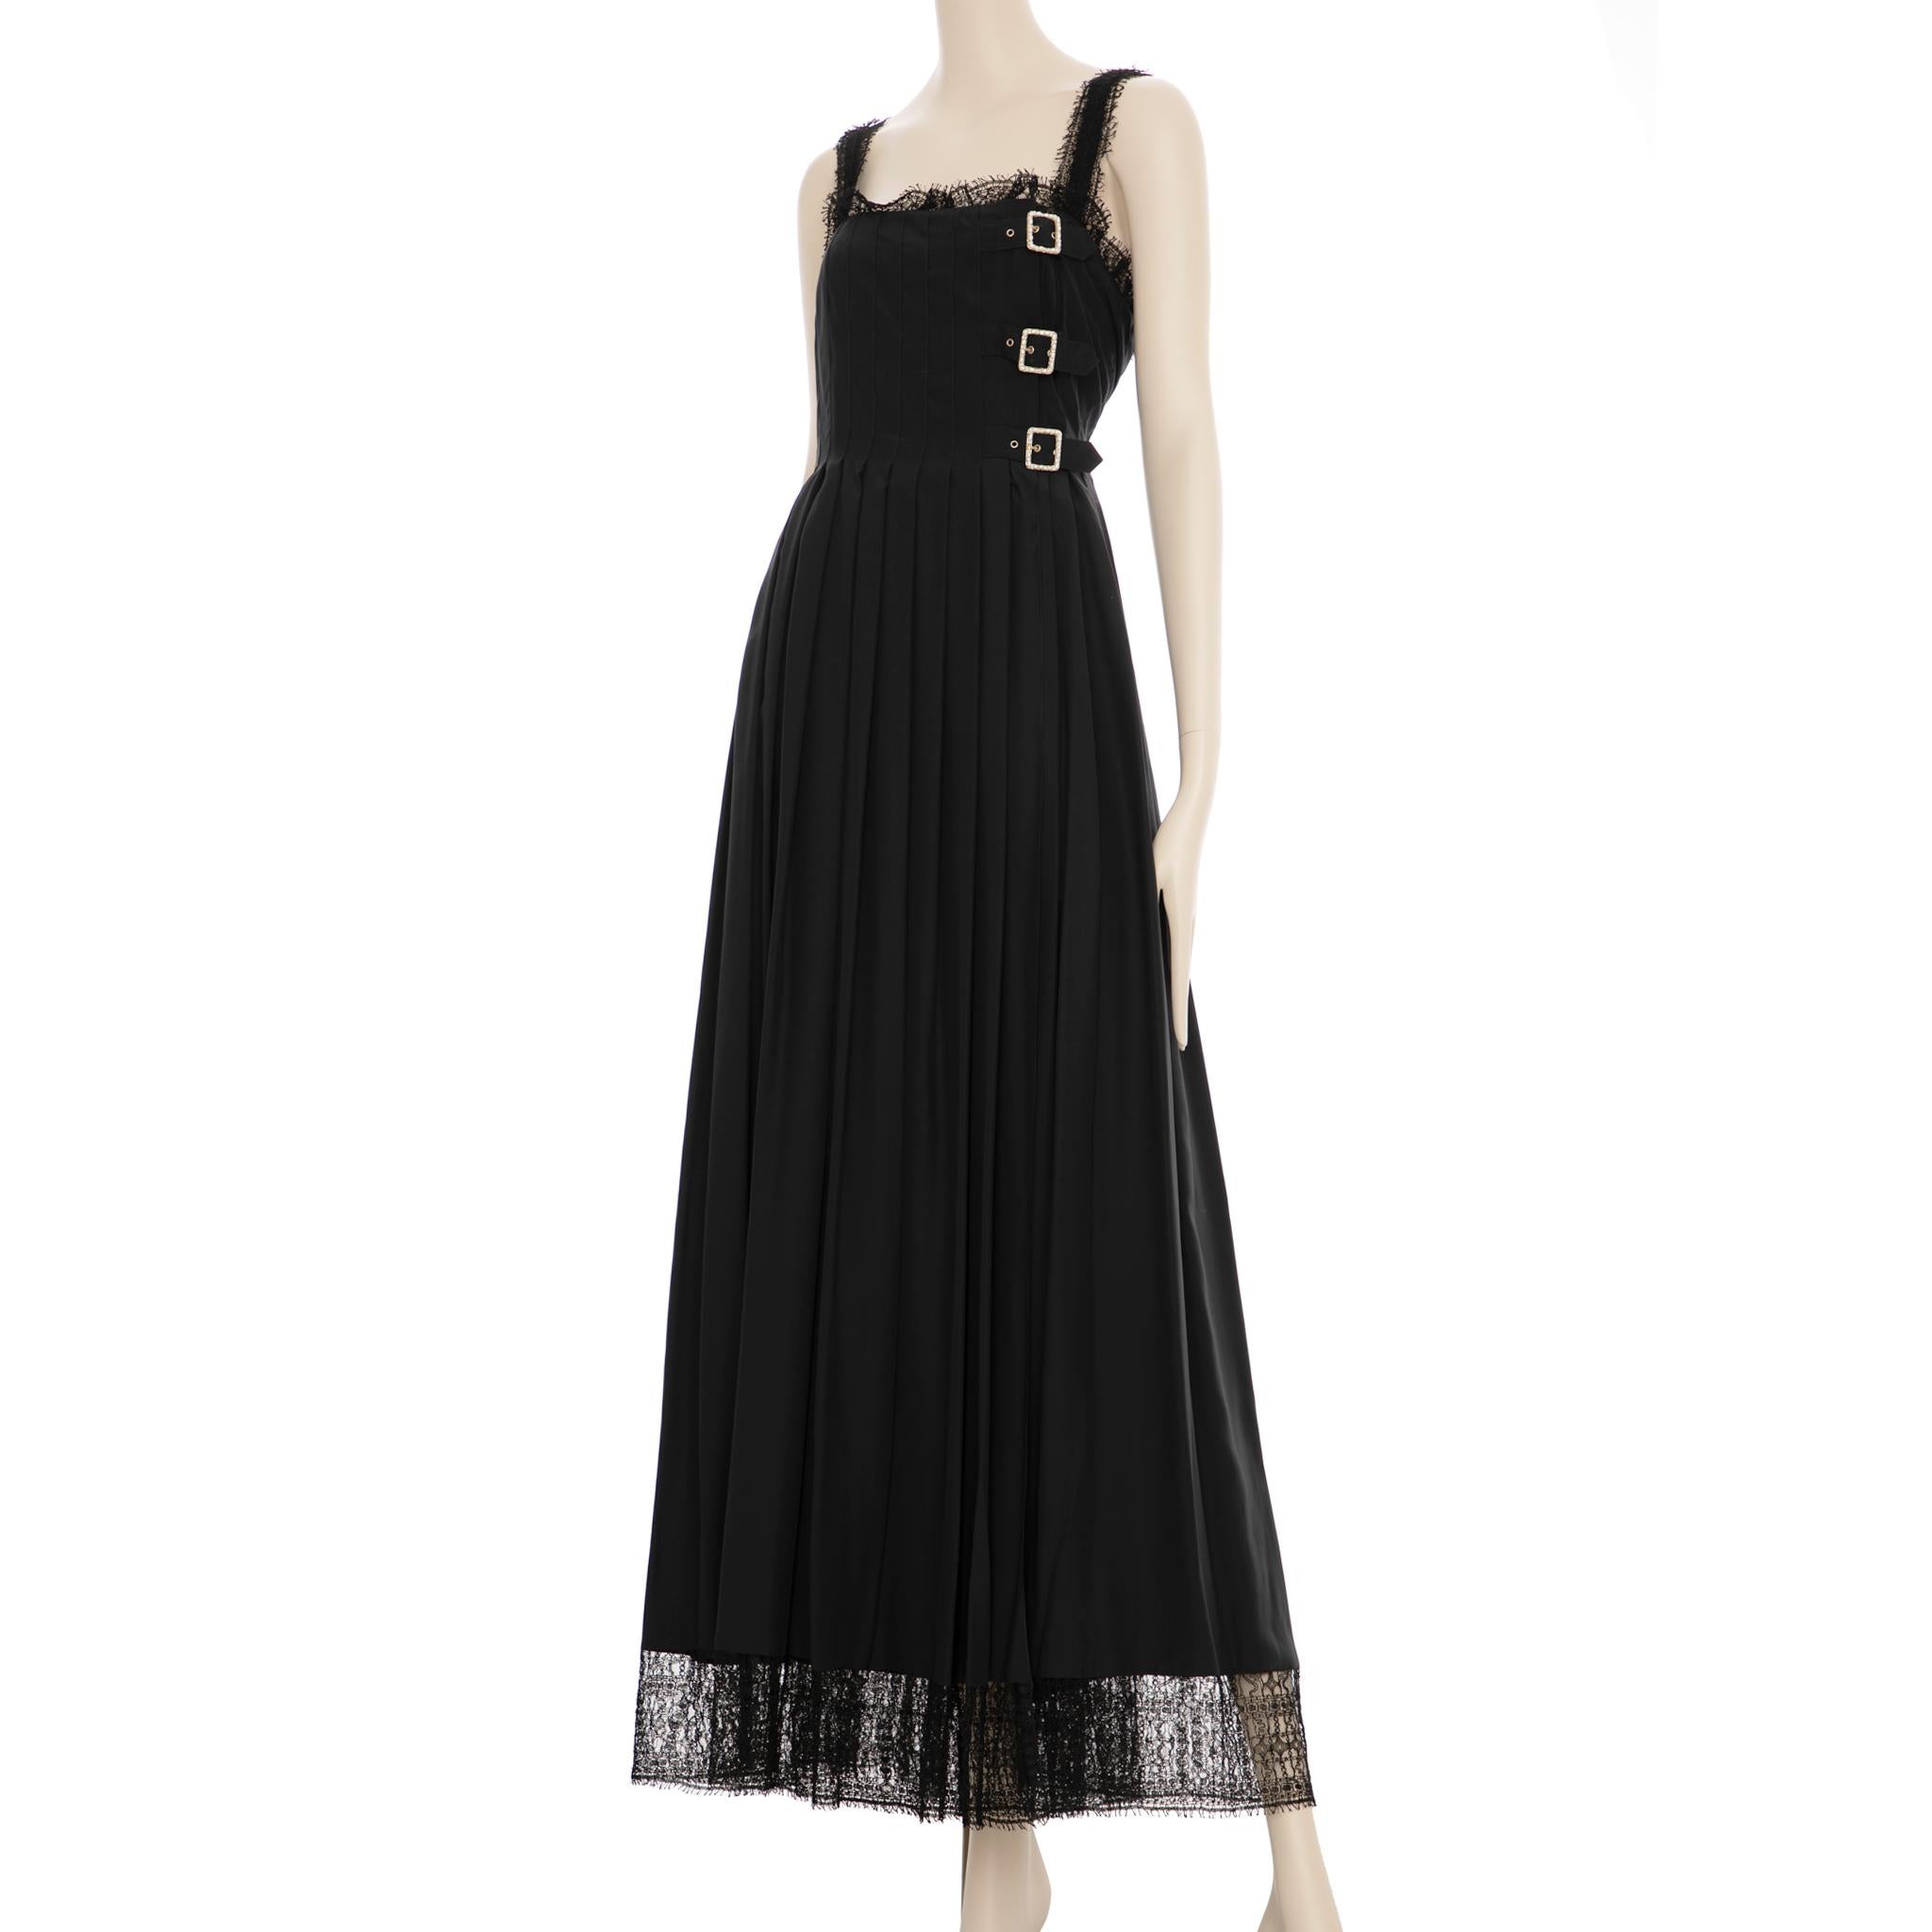 This timeless black knit dress from Chanel is perfect for layering for any occasion. The faux pearl details elevate the design for a sophisticated look. Crafted with quality materials, this dress is sure to last for many